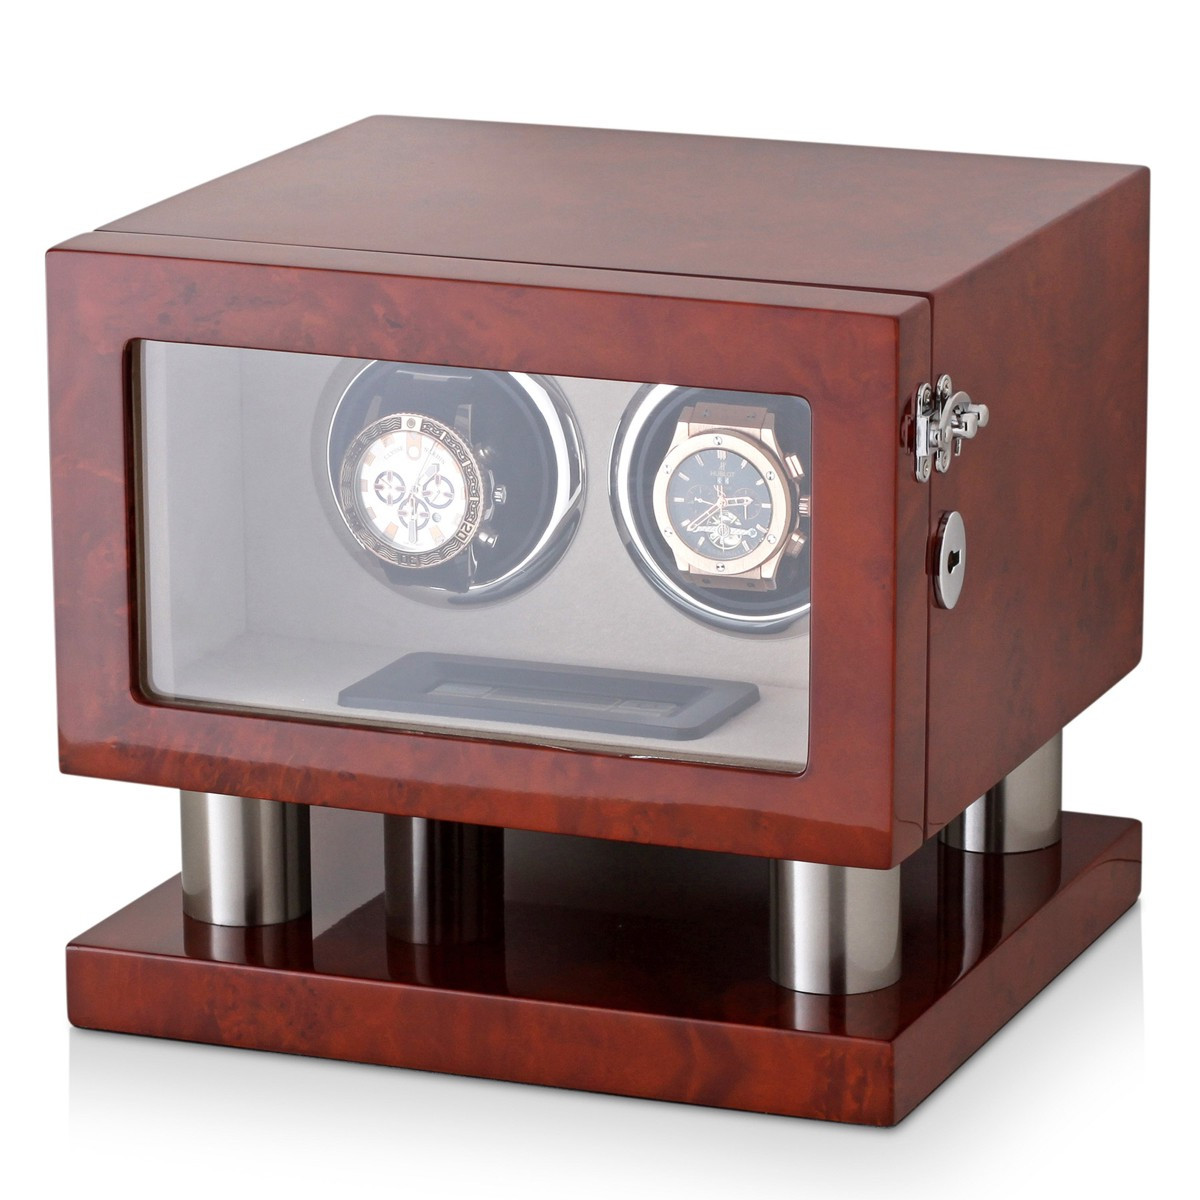 Automatic Watch Winder Box 8002-DBC-D for 2 Watches with LED Light and LCD